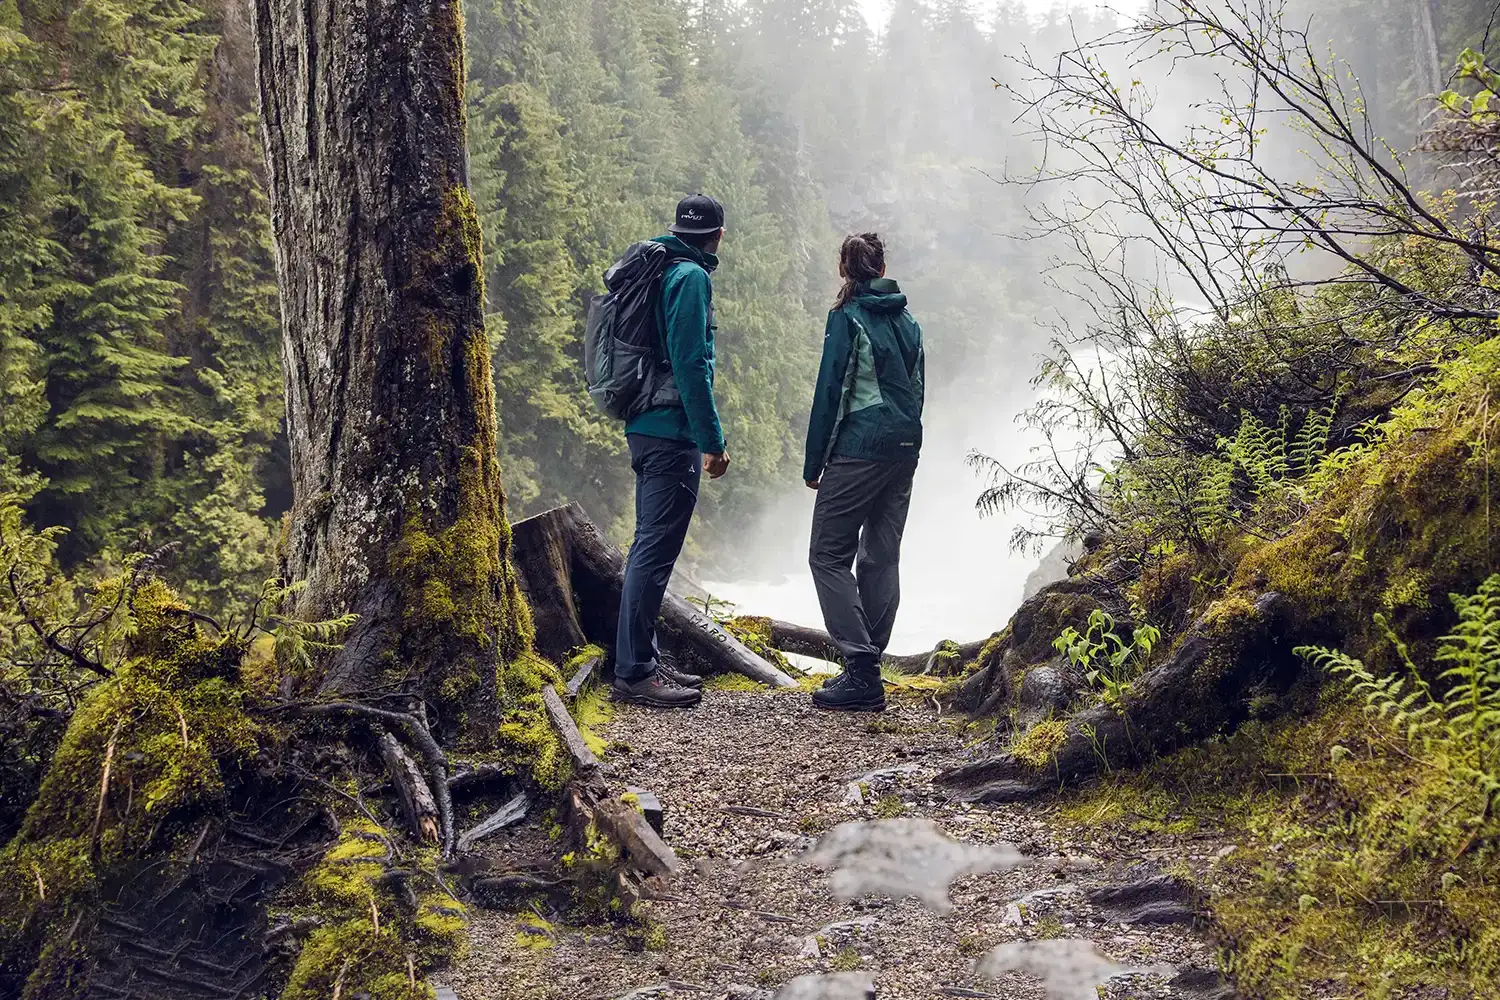 A couple backpackers in rainy forest looking out at river